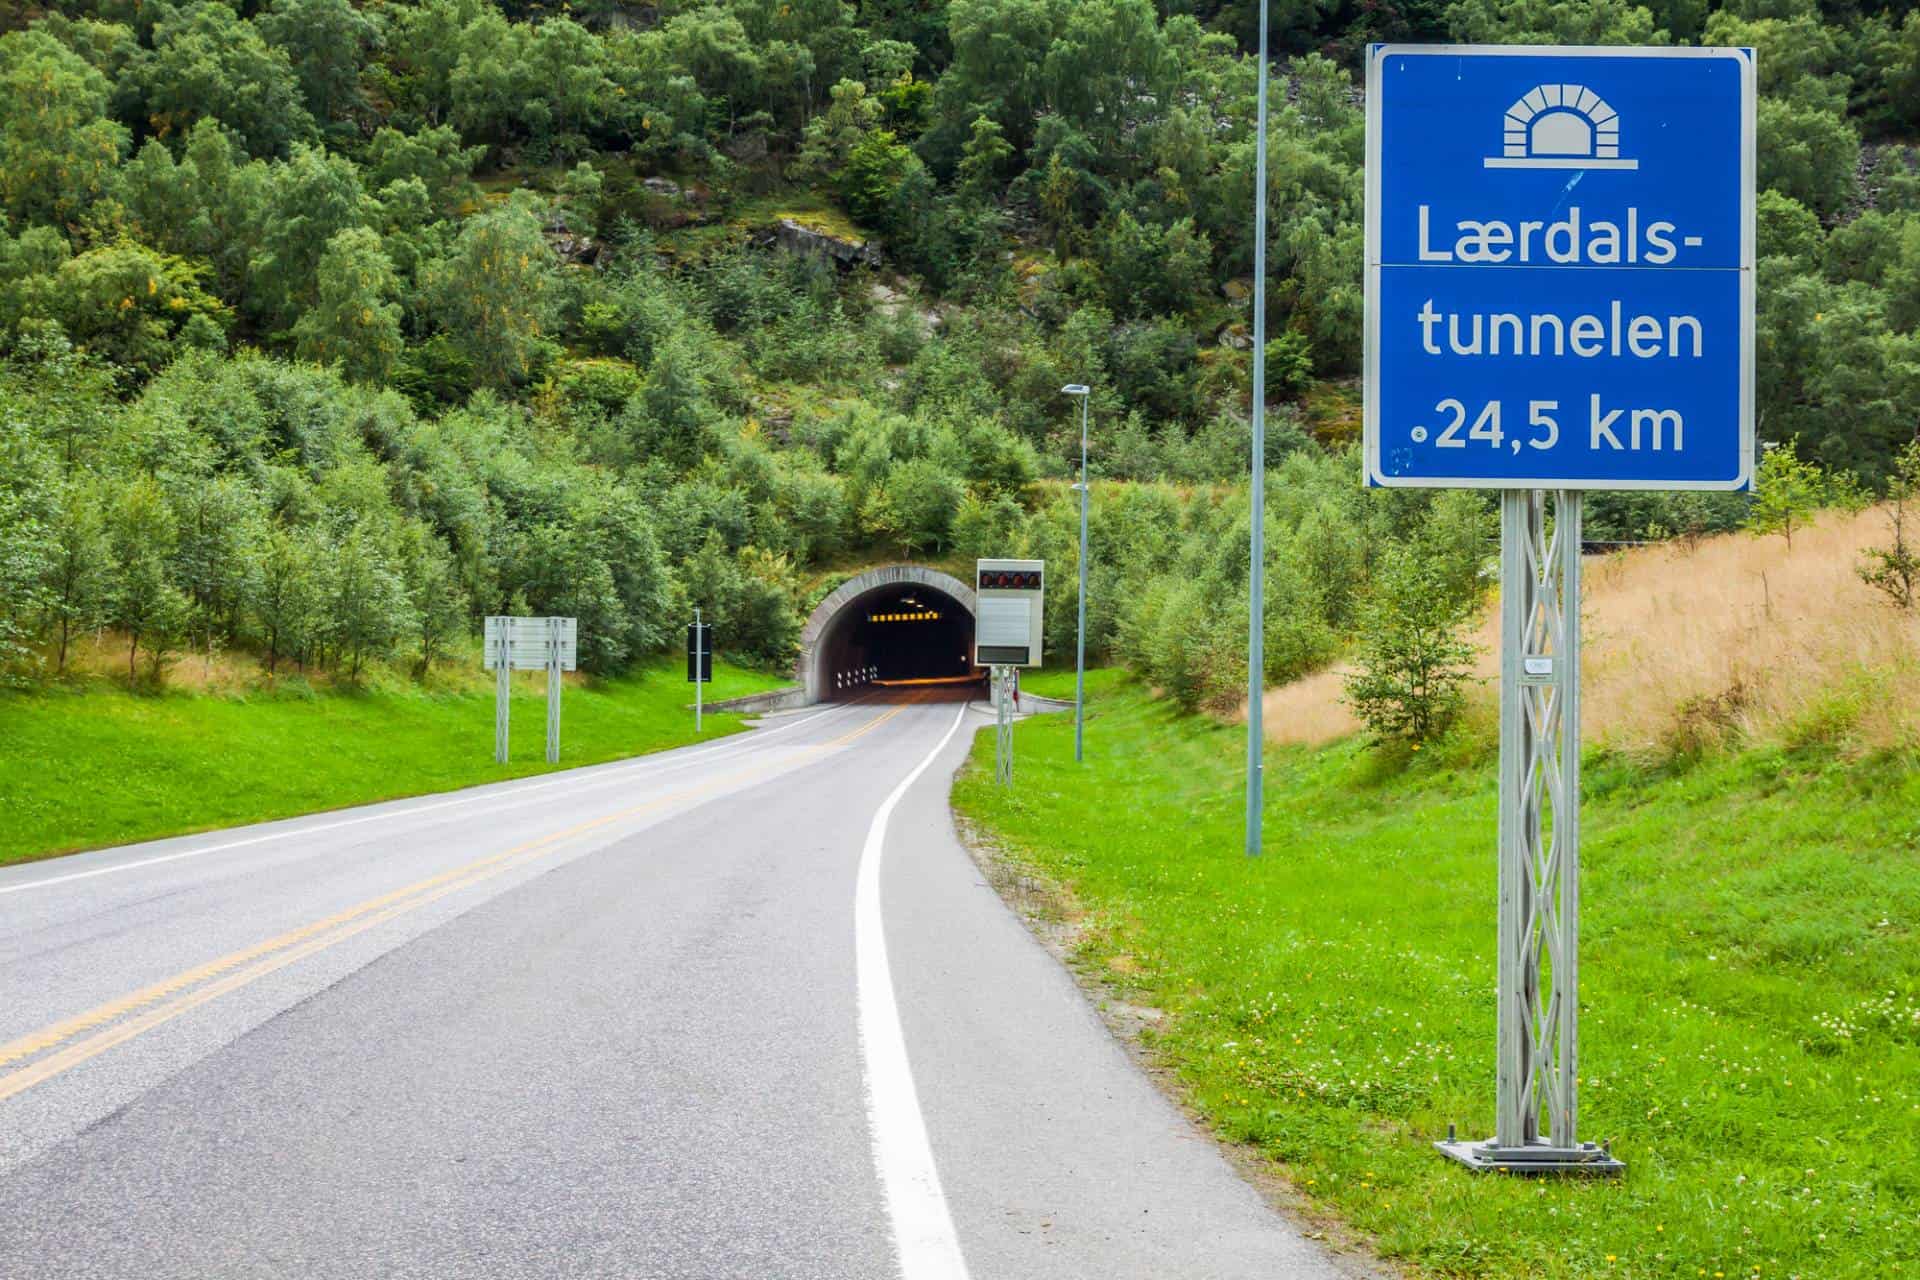 What is the longest tunnel in Europe?